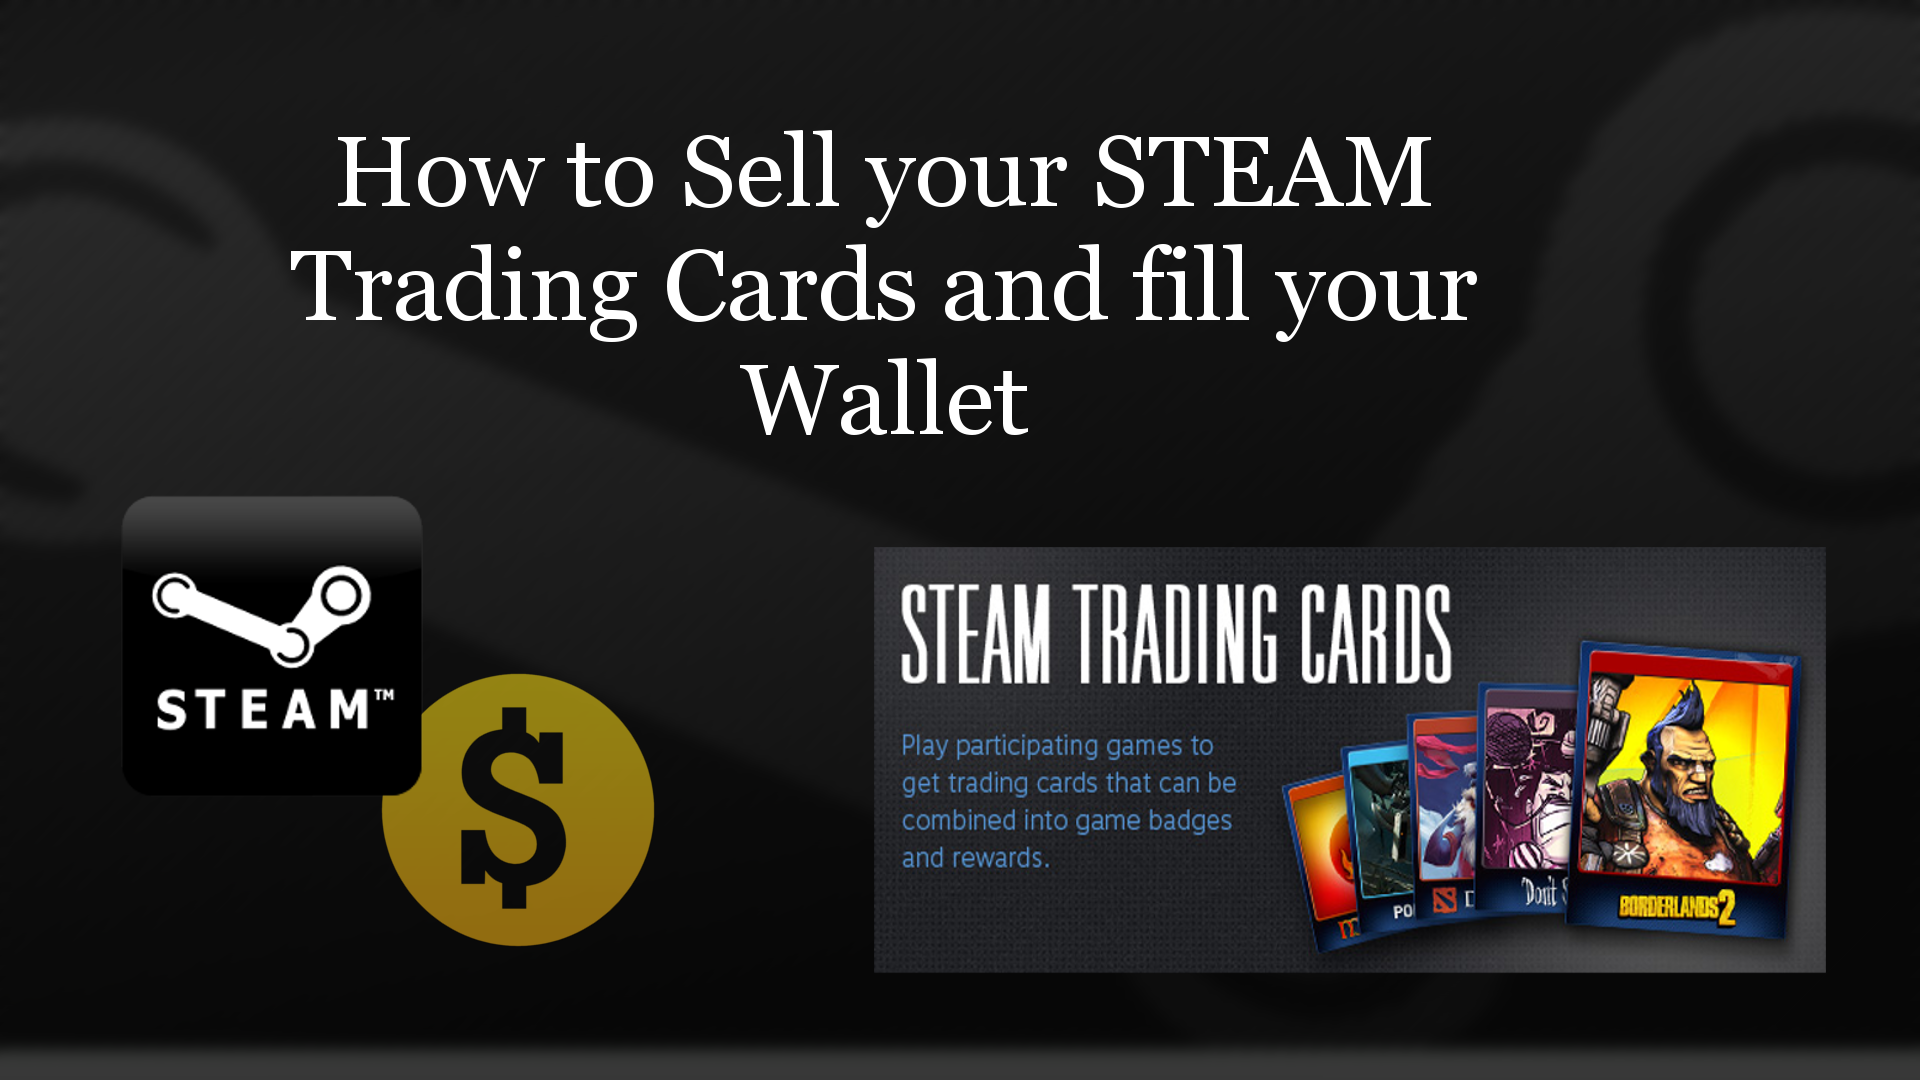 Why am I getting pending funds? :: Steam Community Market